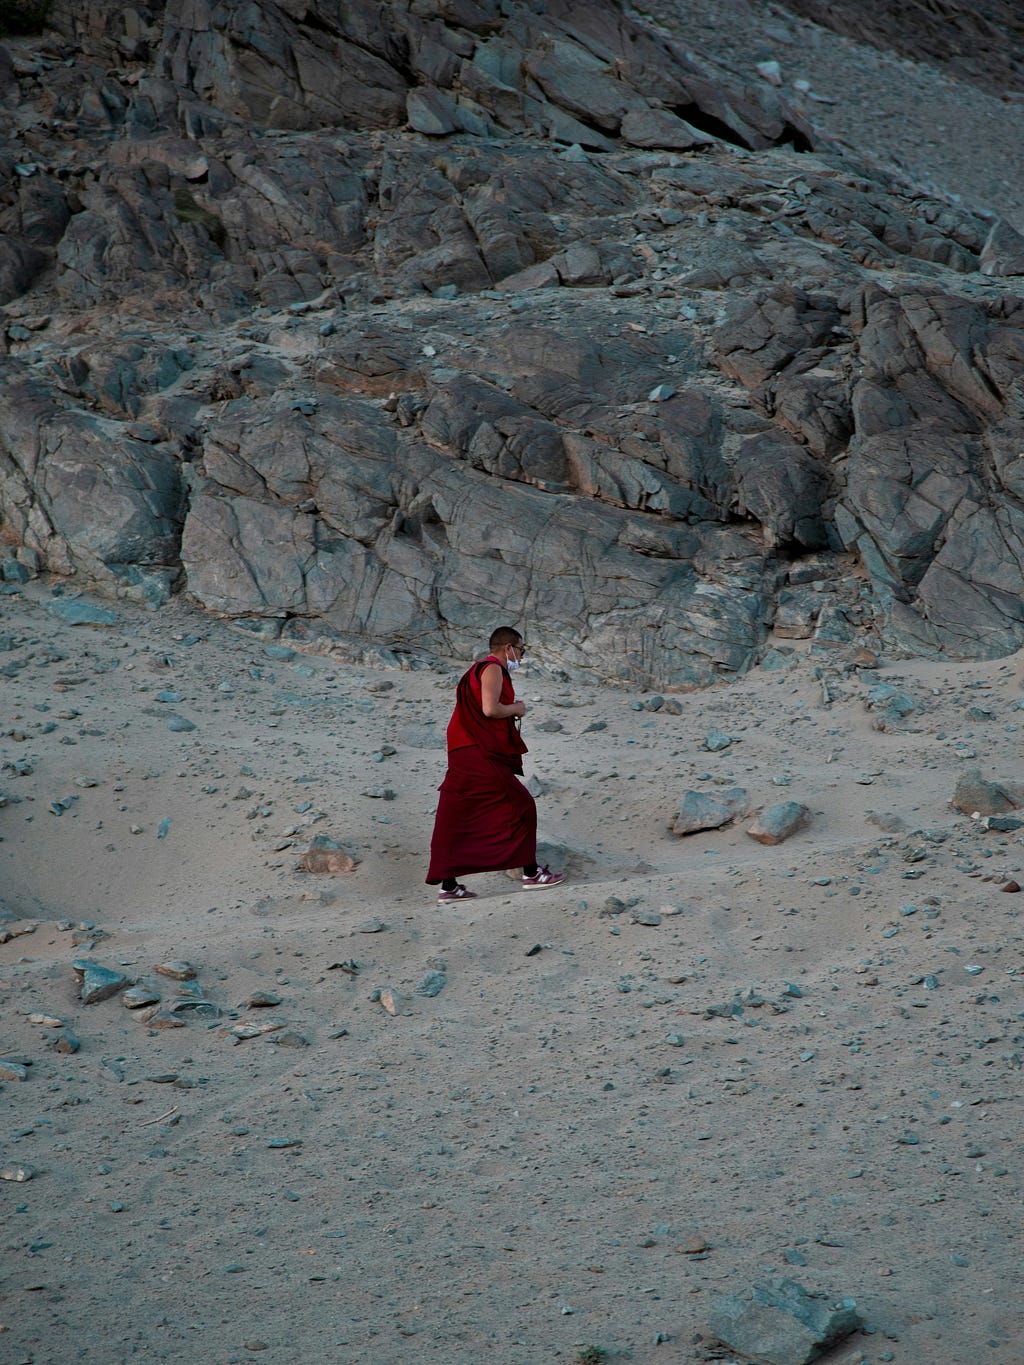 Tibetan Buddhist monk wearing sneakers and a long maroon robe walking on a grey dusty path — rocks are scattered around the path and there is a big rock hill in the background